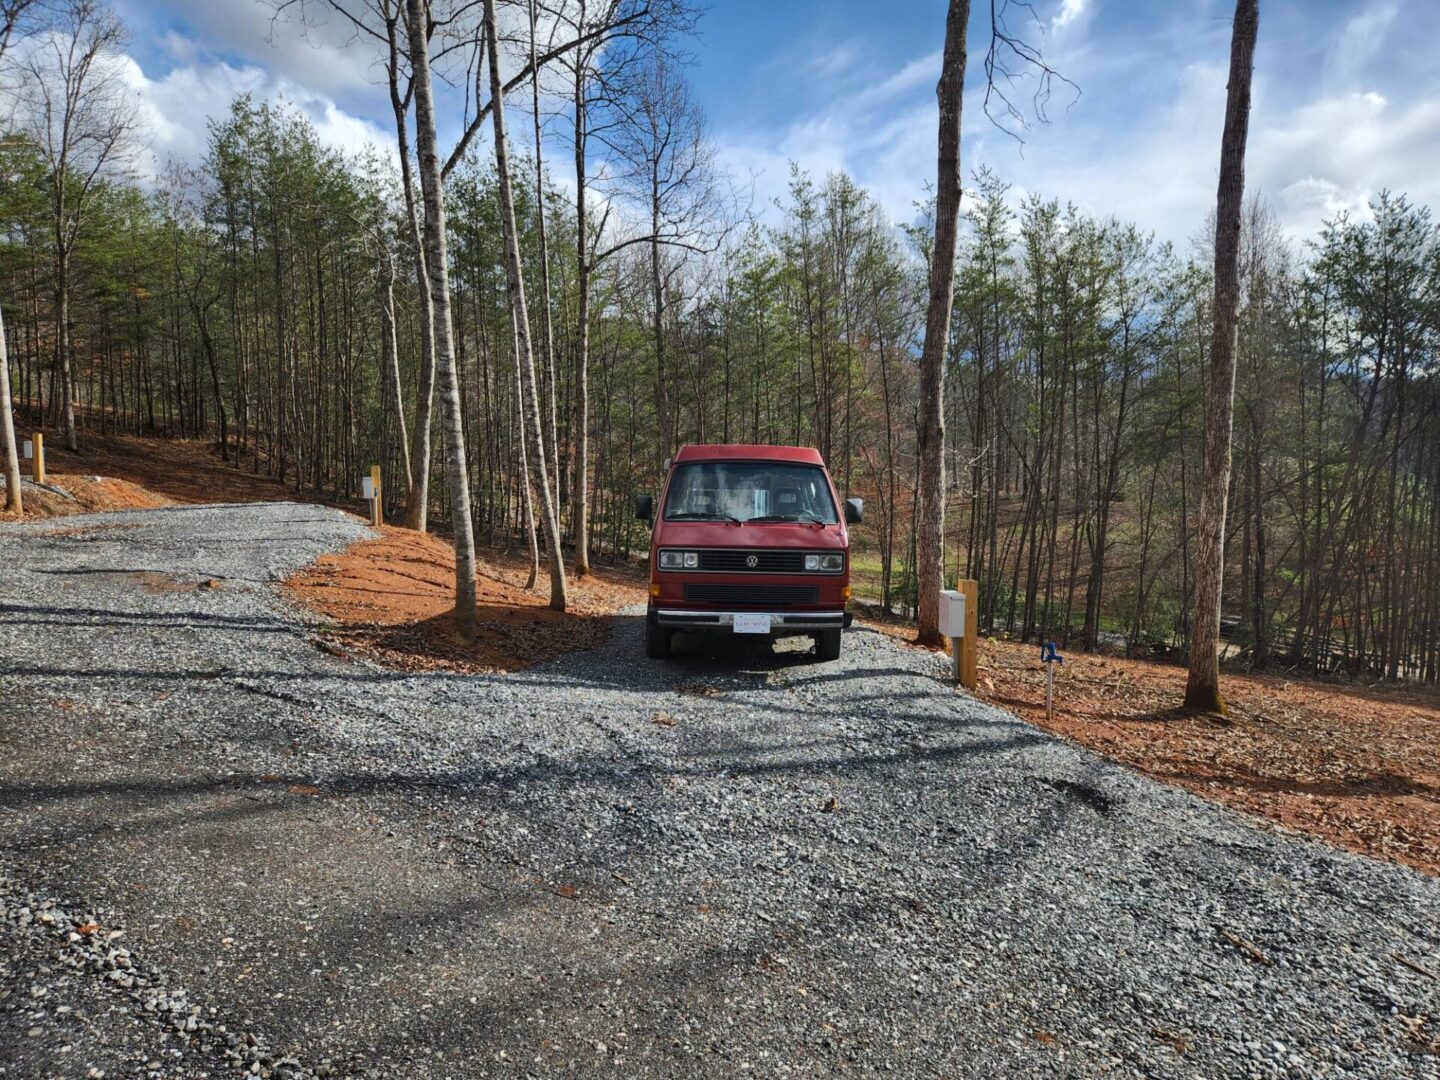 A van parked on the side of a road in the woods.